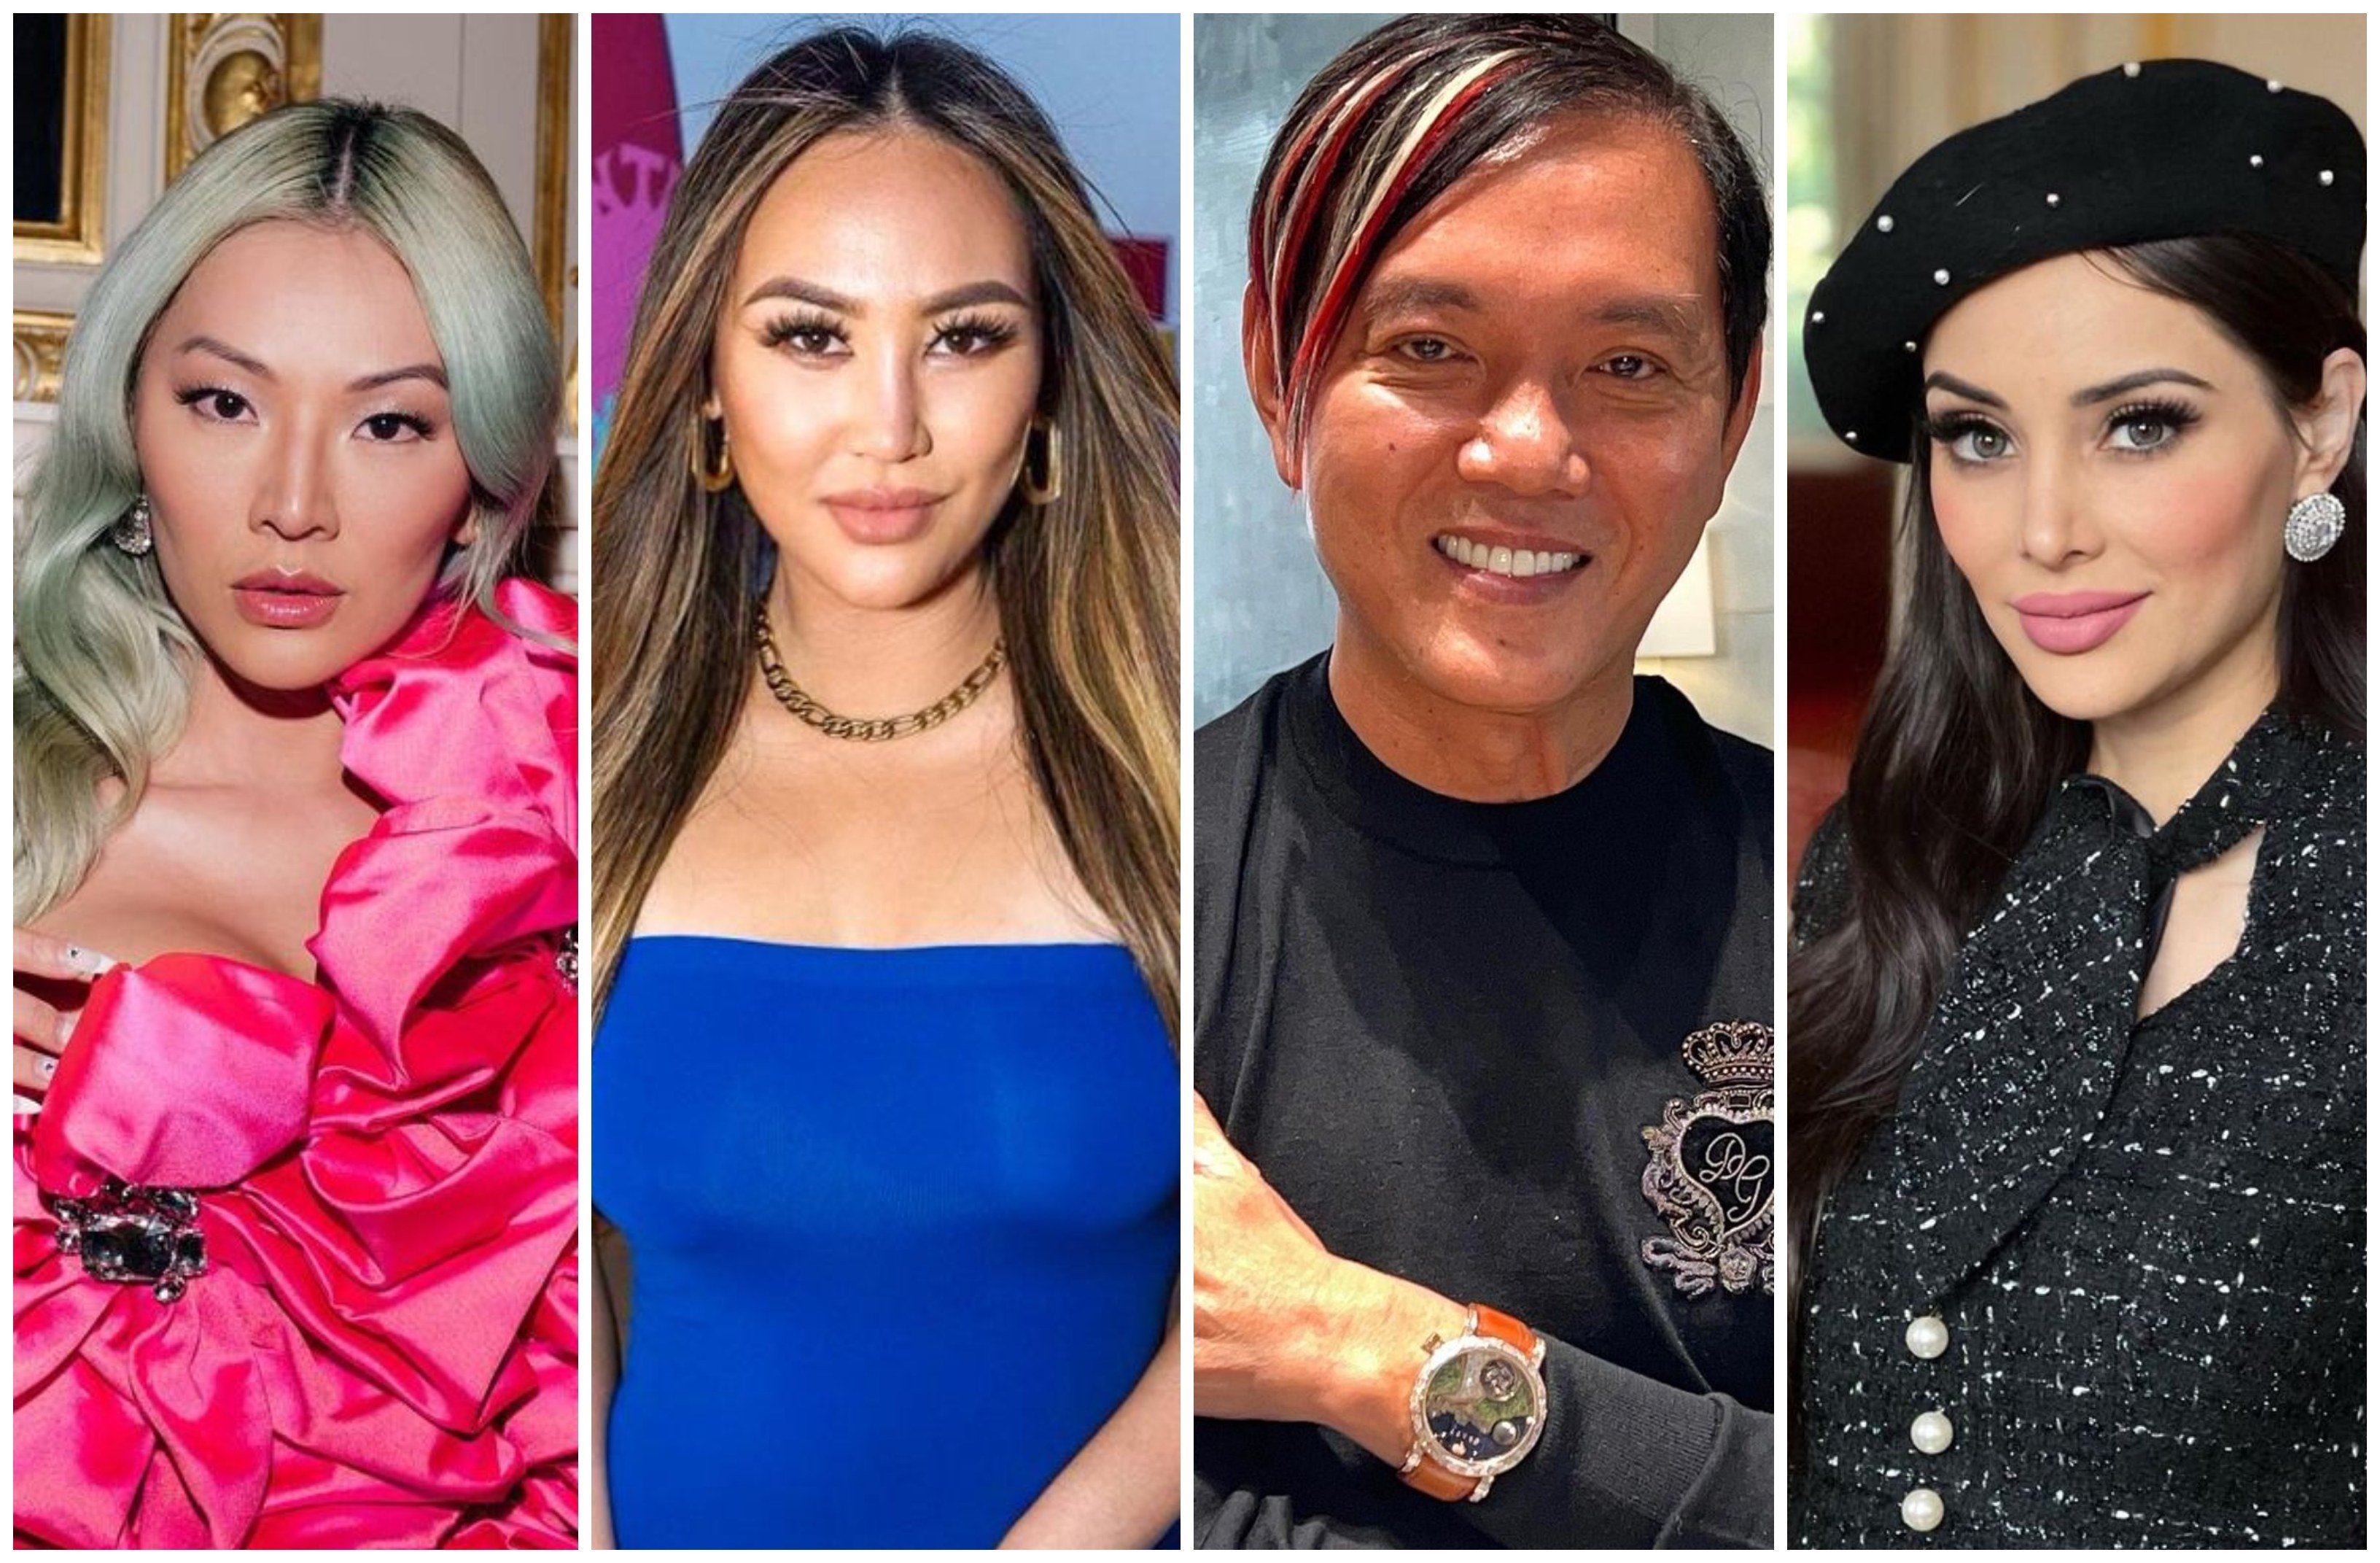 Tina Leung, Dorothy Wang, and couple Stephen and Deborah Hung (left to right) are all set to star in Netflix’s Bling Empire: New York. Photos: @stephenhungofficial, @dorothywang, @tinaleung, @deborahhung/Instagram